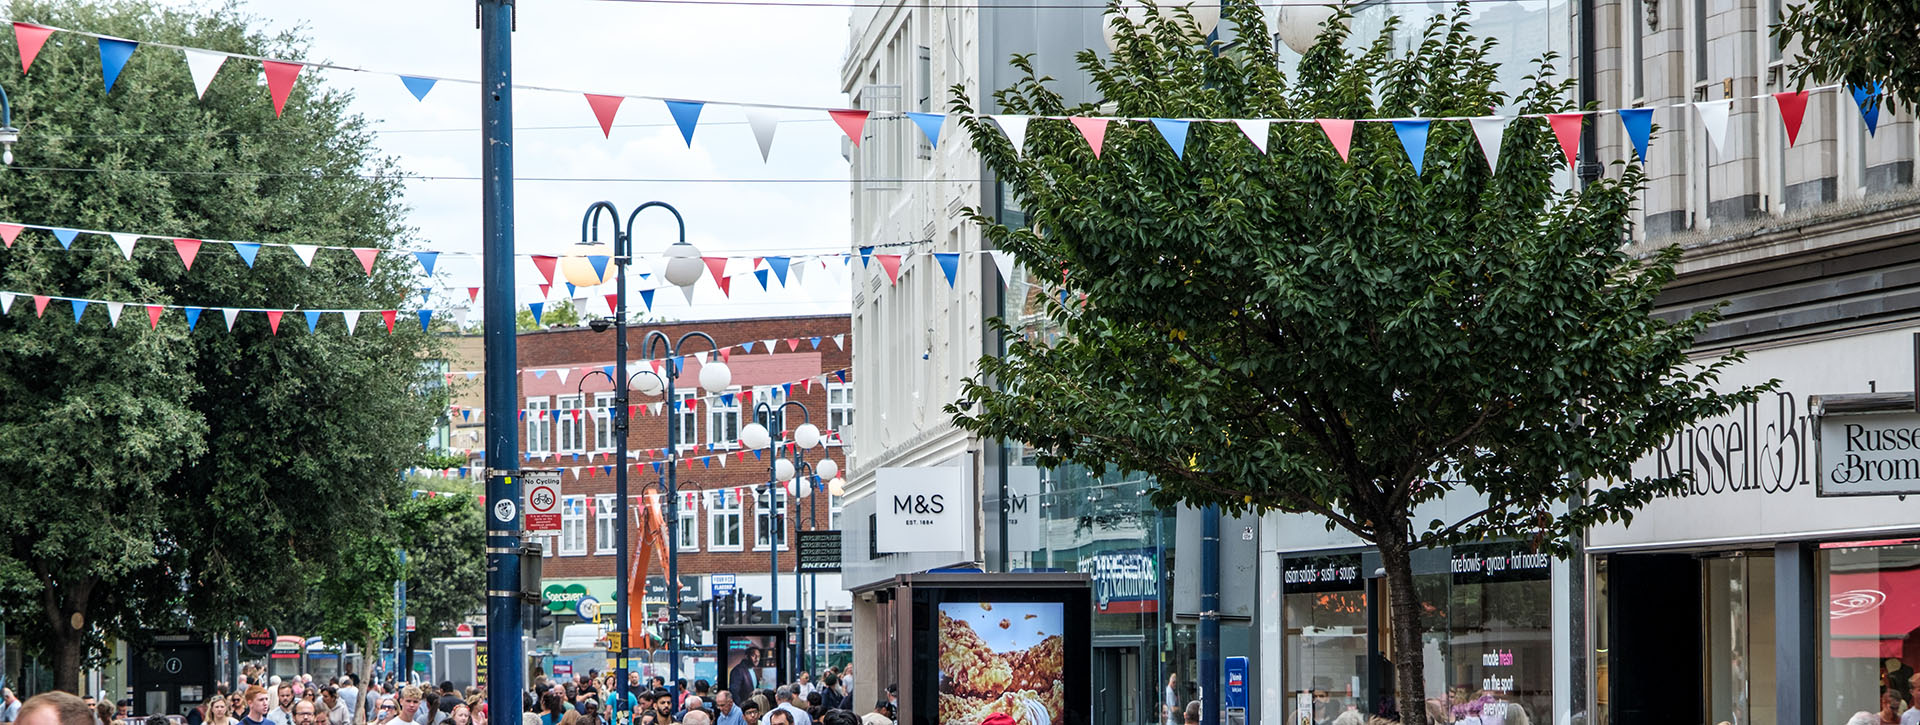 high street with bunting